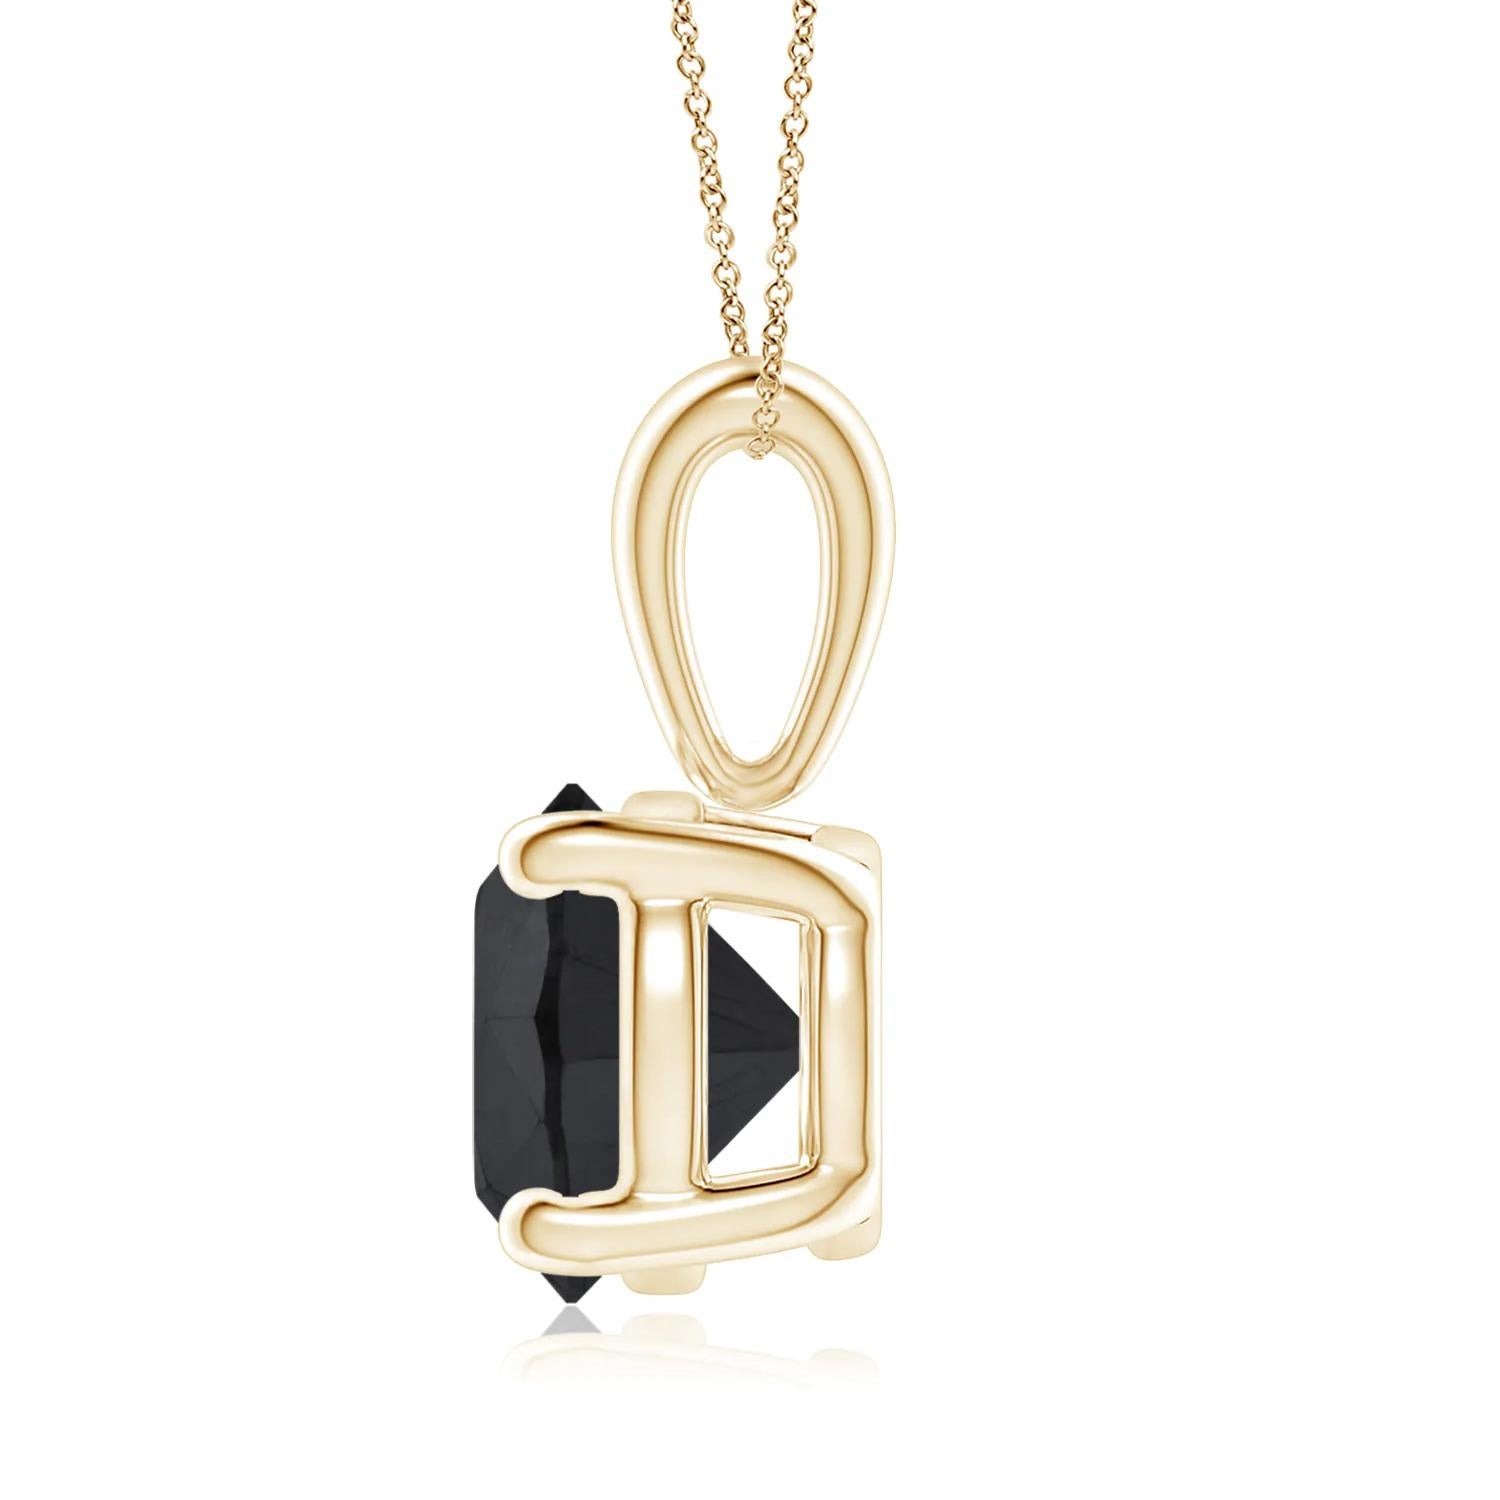 Surprise a special woman in your life with this breathtaking, statement hand crafted solitaire black diamond necklace. This eye-catching pendant necklace features a 1.76 carat round cut black diamond, measuring 6.73 x 6.71 x 5.25 mm set in 14k